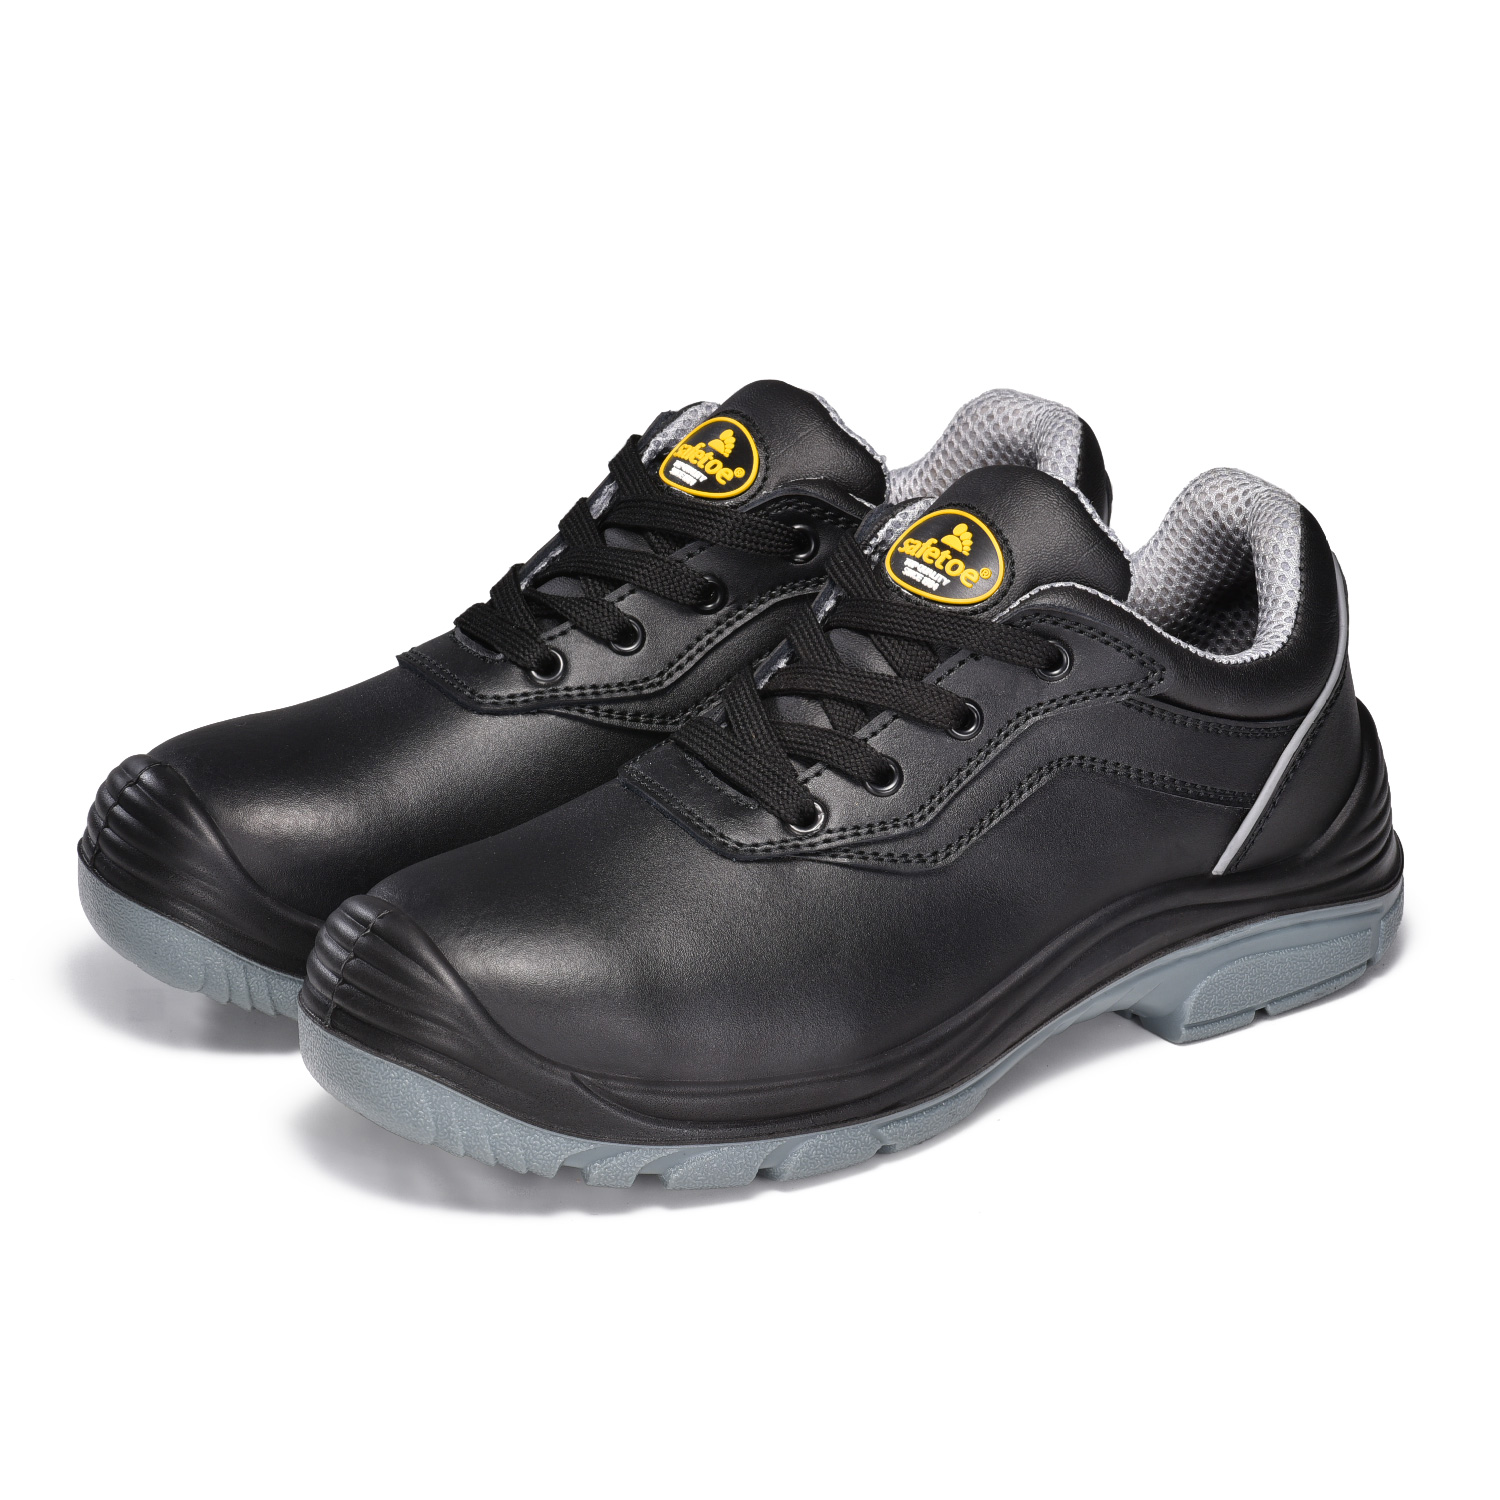 S3 Industrial Leather Safety Shoe with Composite Toe L-7522